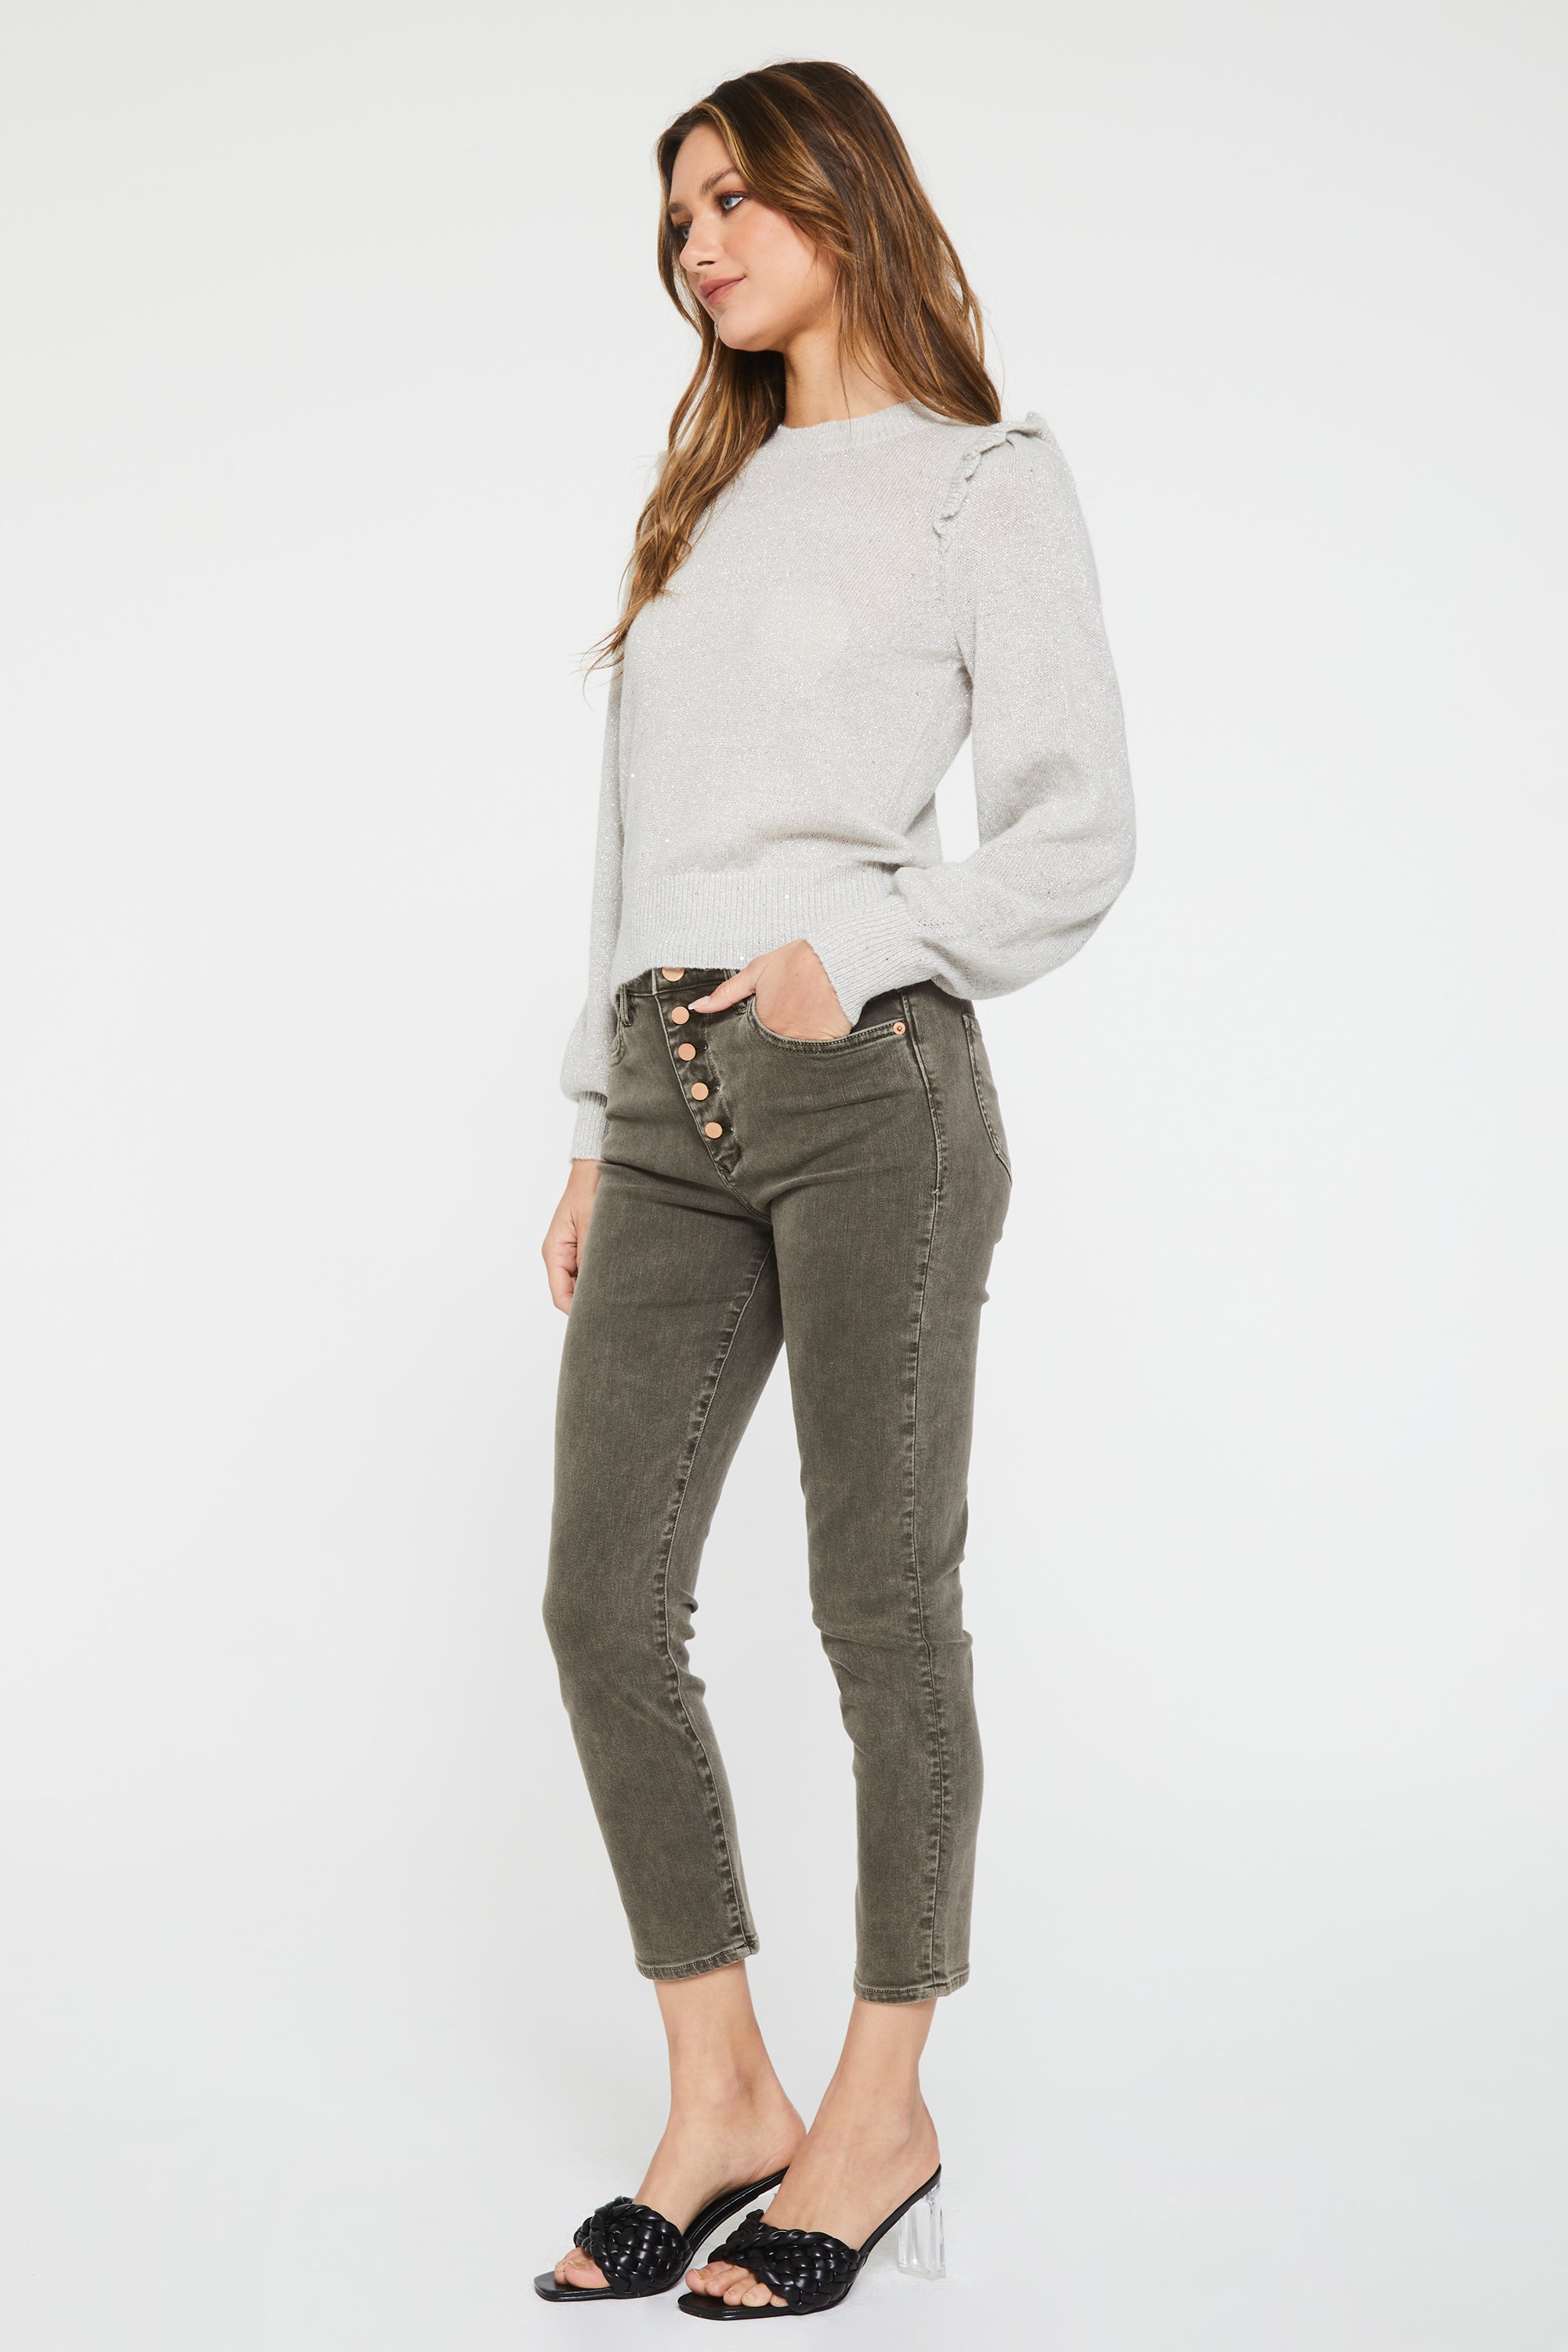 vera-mock-neck-sweater-silver-full-image-another-love-clothing